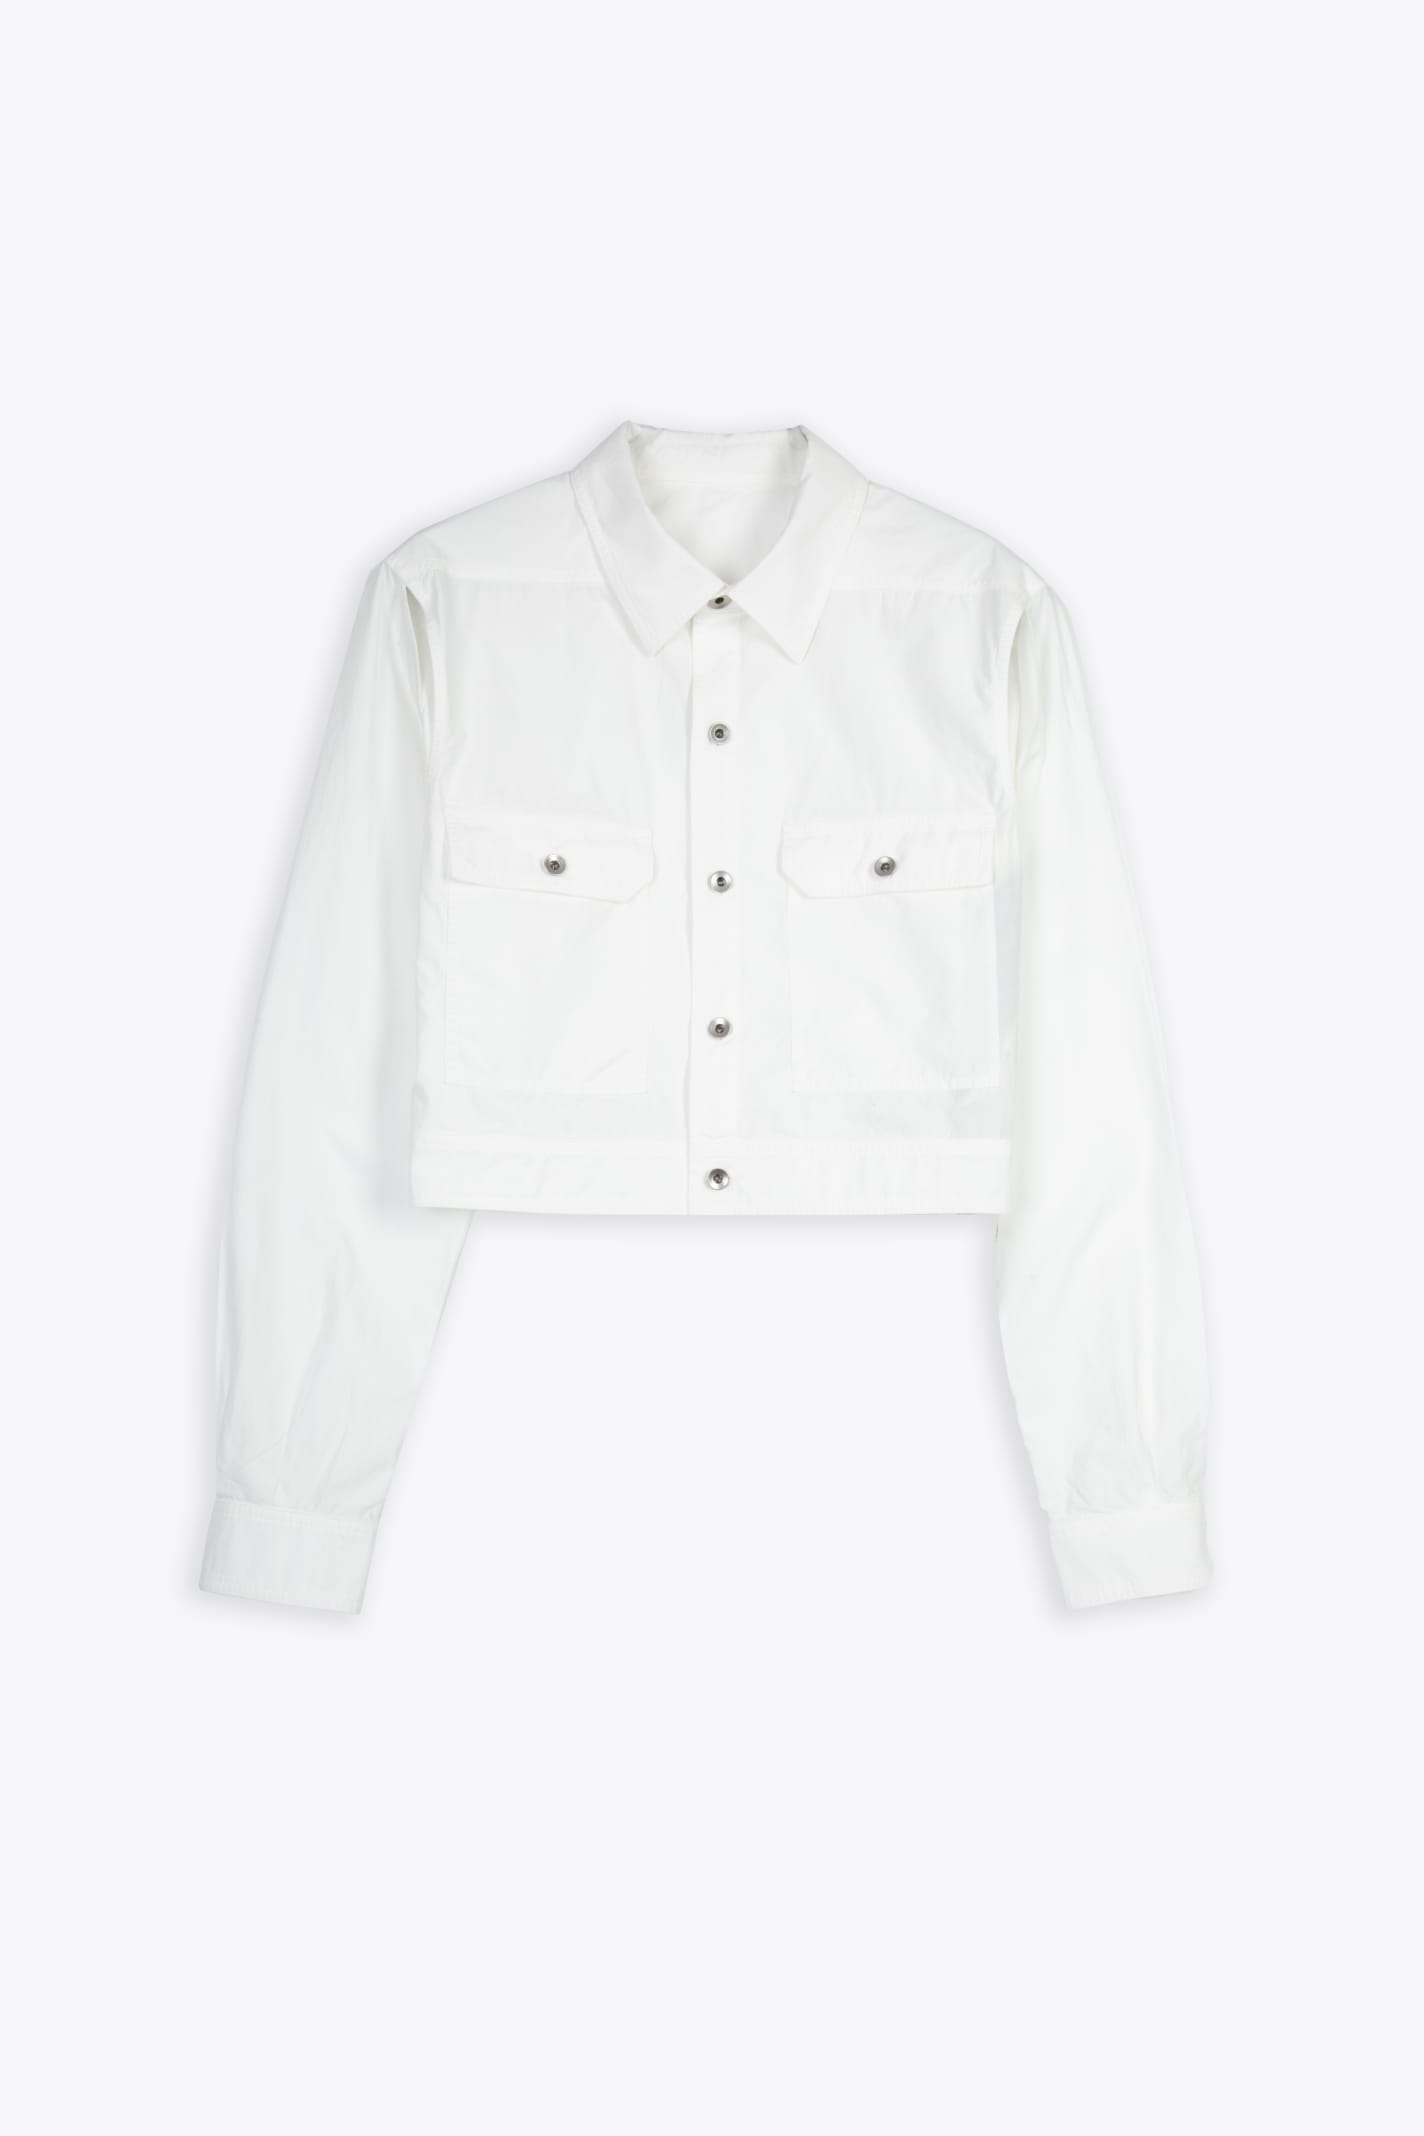 Shop Drkshdw Cape Sleeve Cropped Outershirt White Poplin Cotton Outershirt - Cape Sleeve Cropped Outershirt